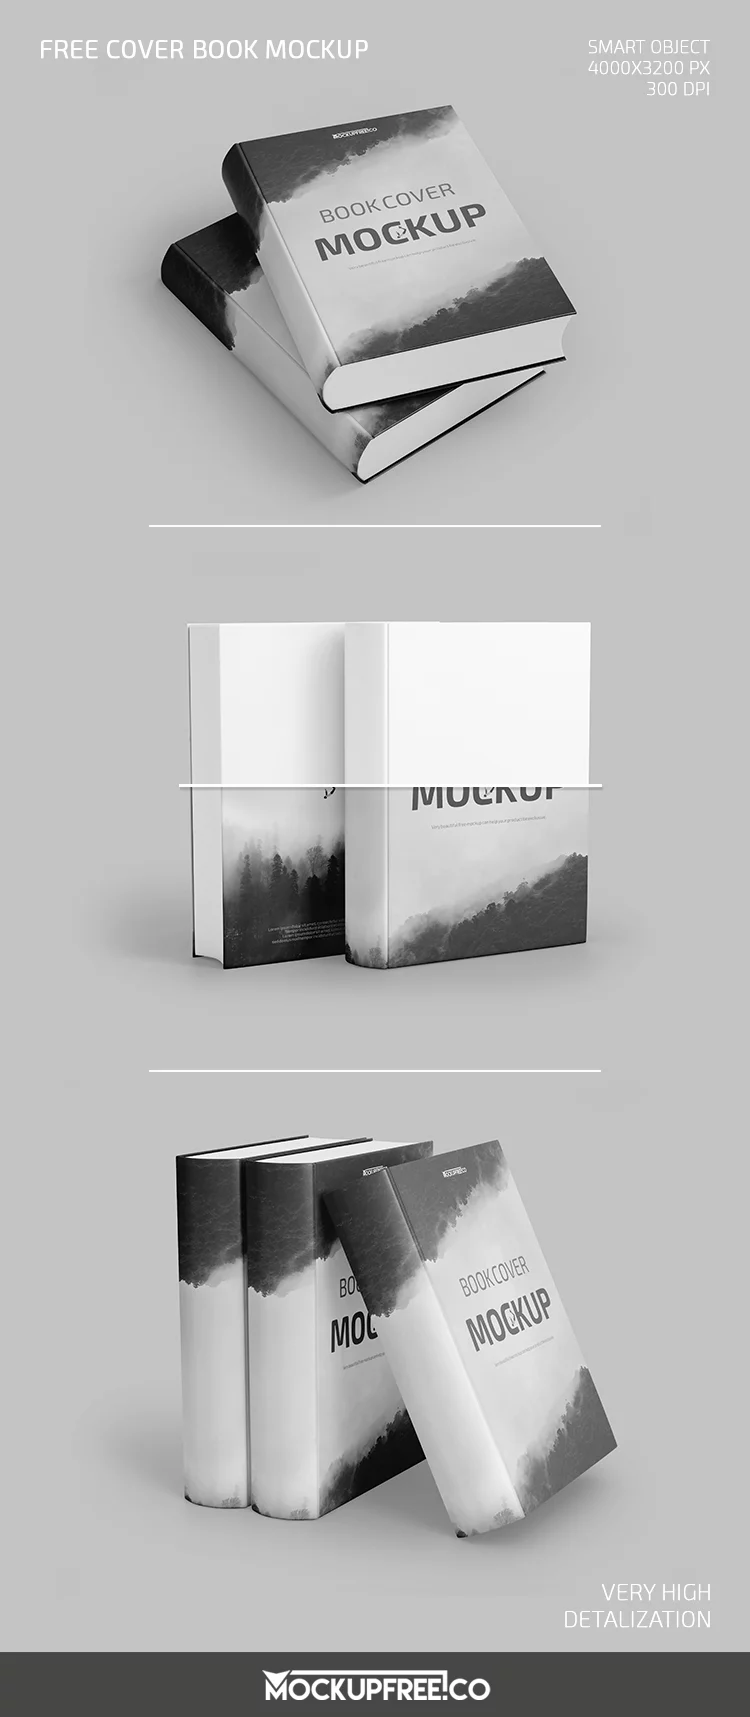 Free Cover Book Mockup in PSD